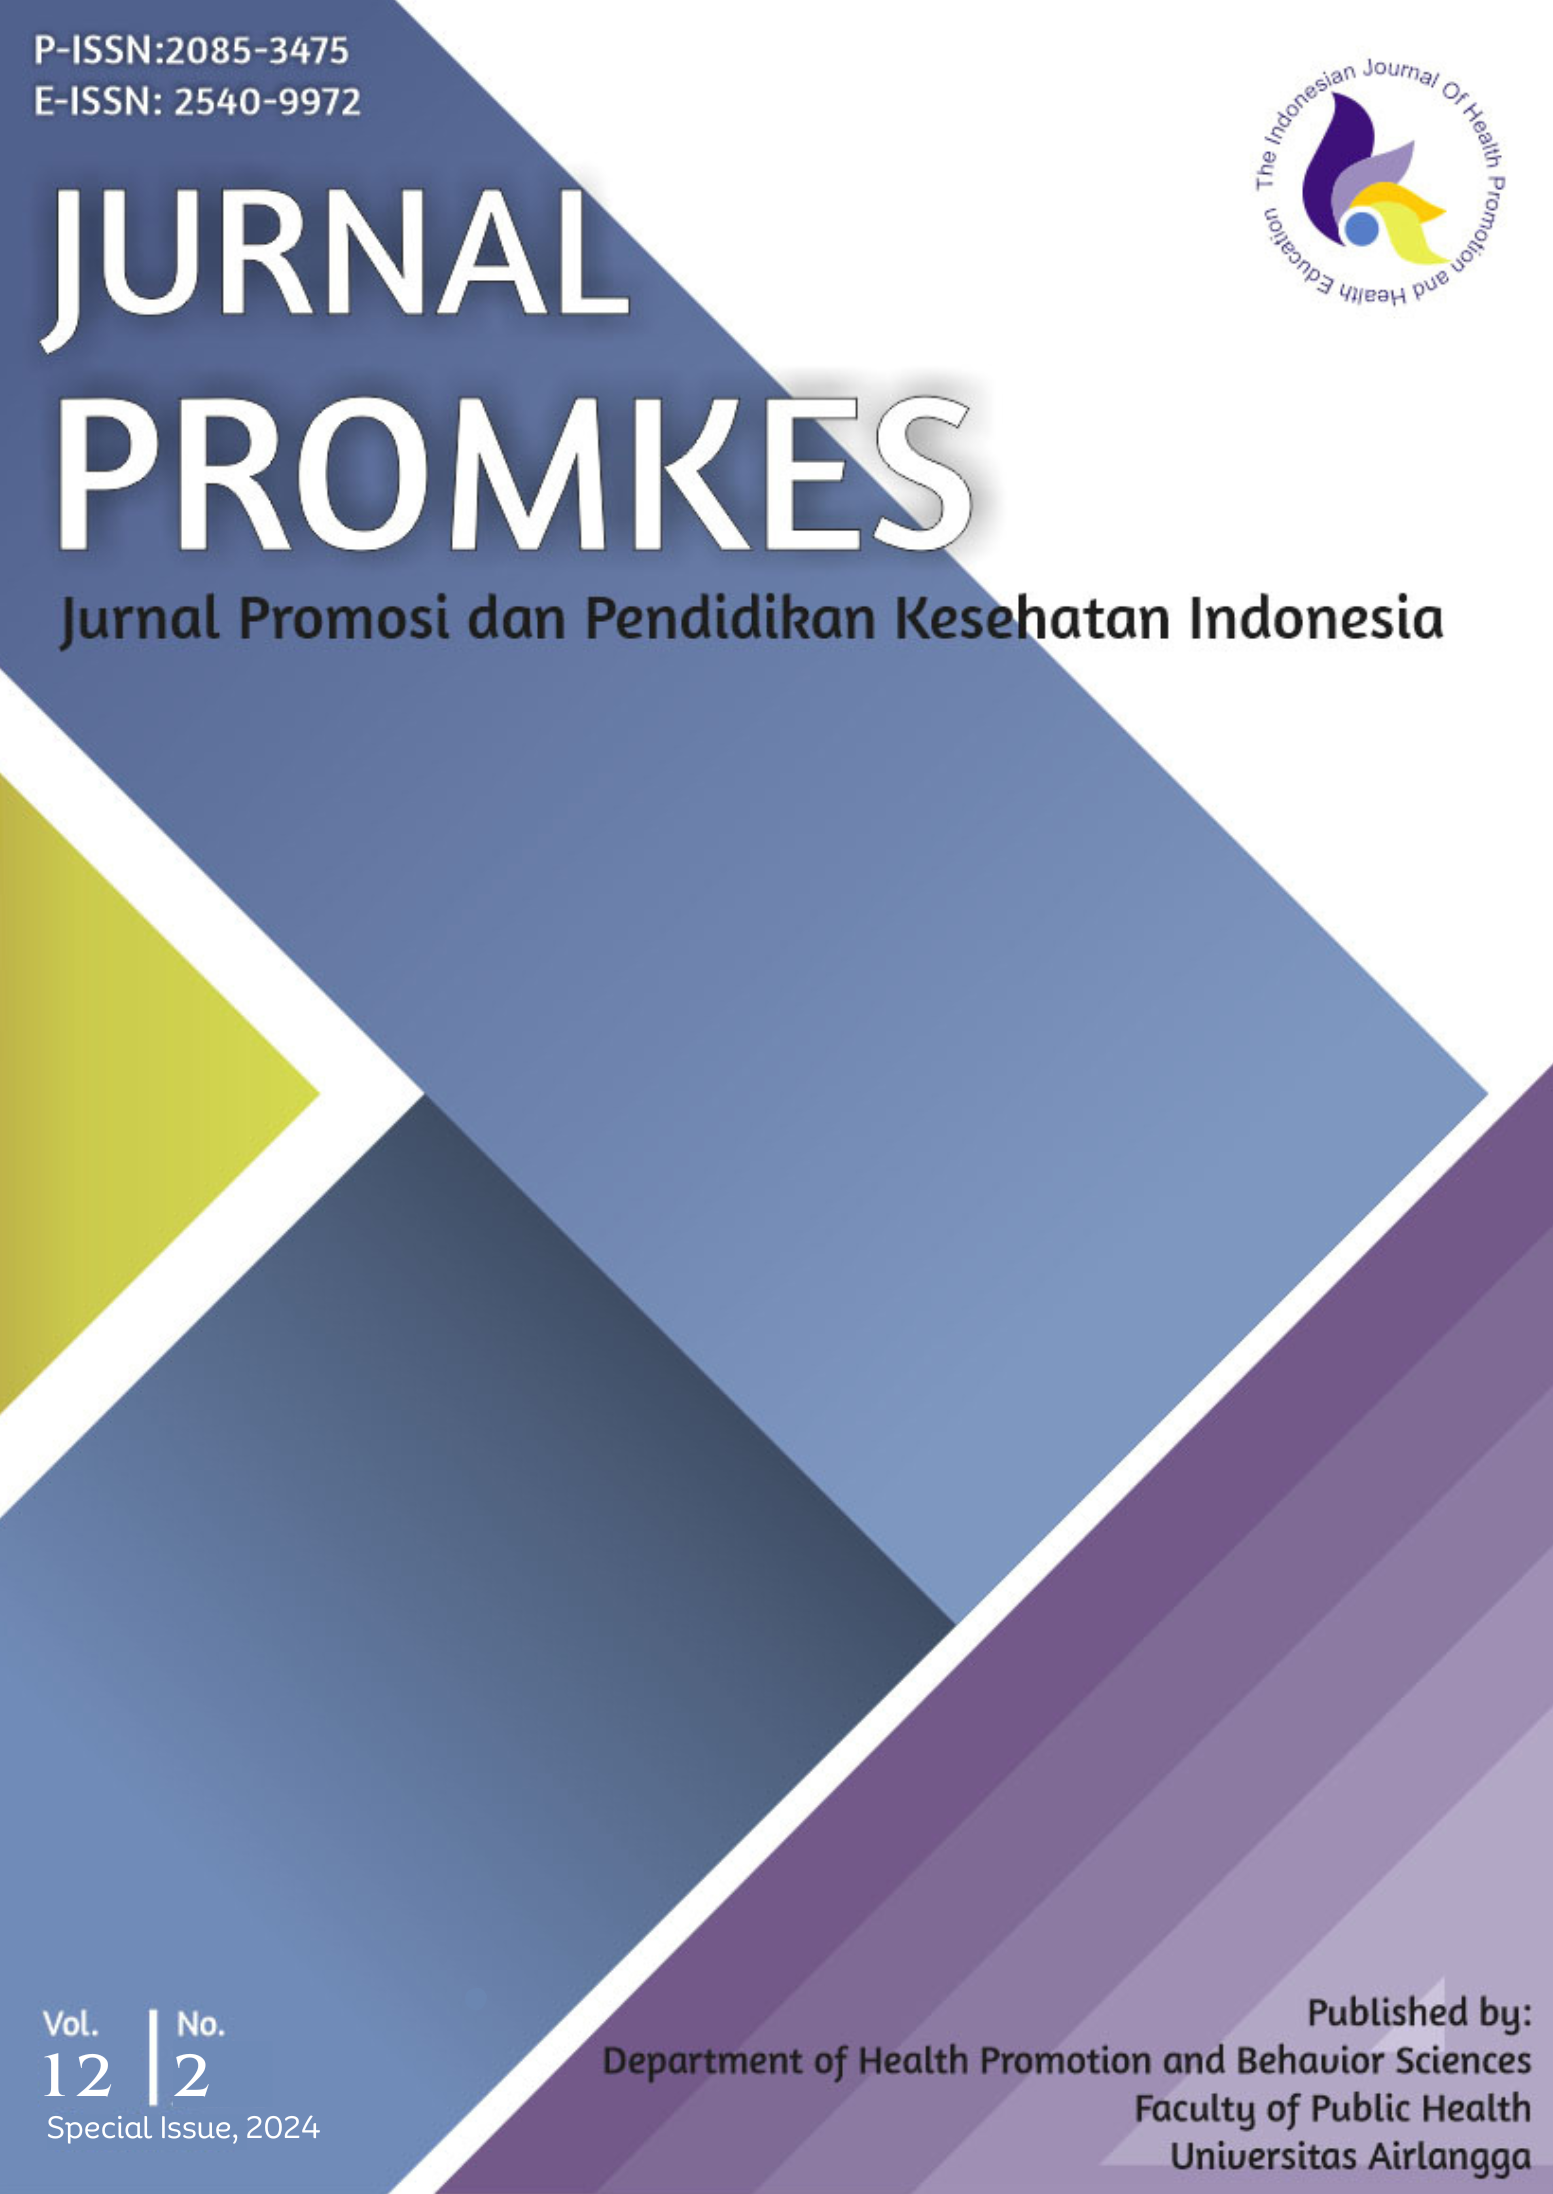 						View Vol. 12 No. SI2 (2024): Jurnal Promkes: The Indonesian Journal of Health Promotion and Health Education
					